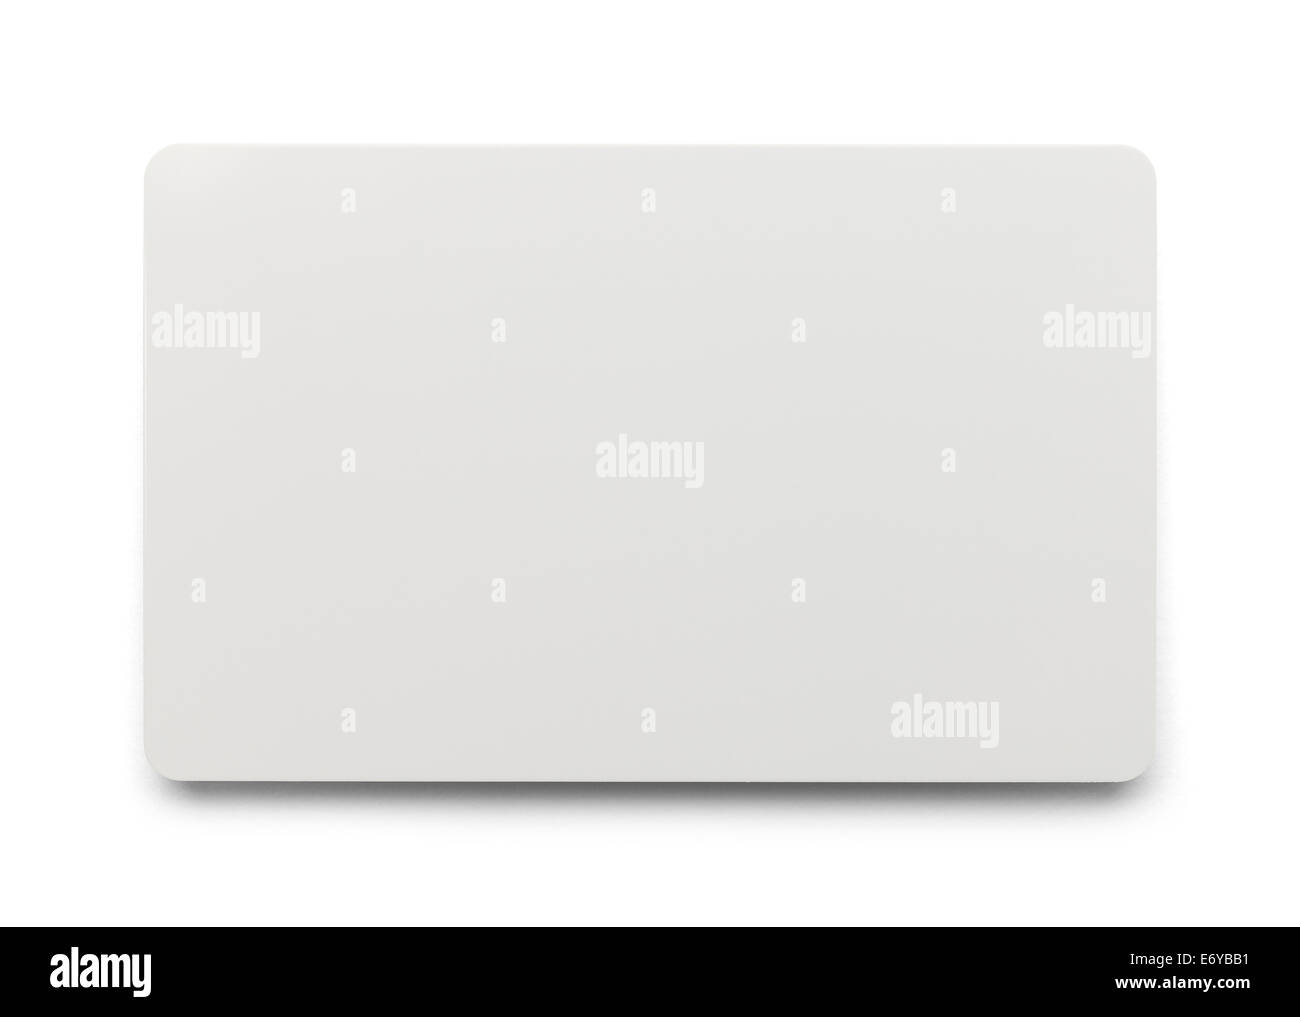 White Plastic Card with Copy Space Isolated on White Background. Stock Photo